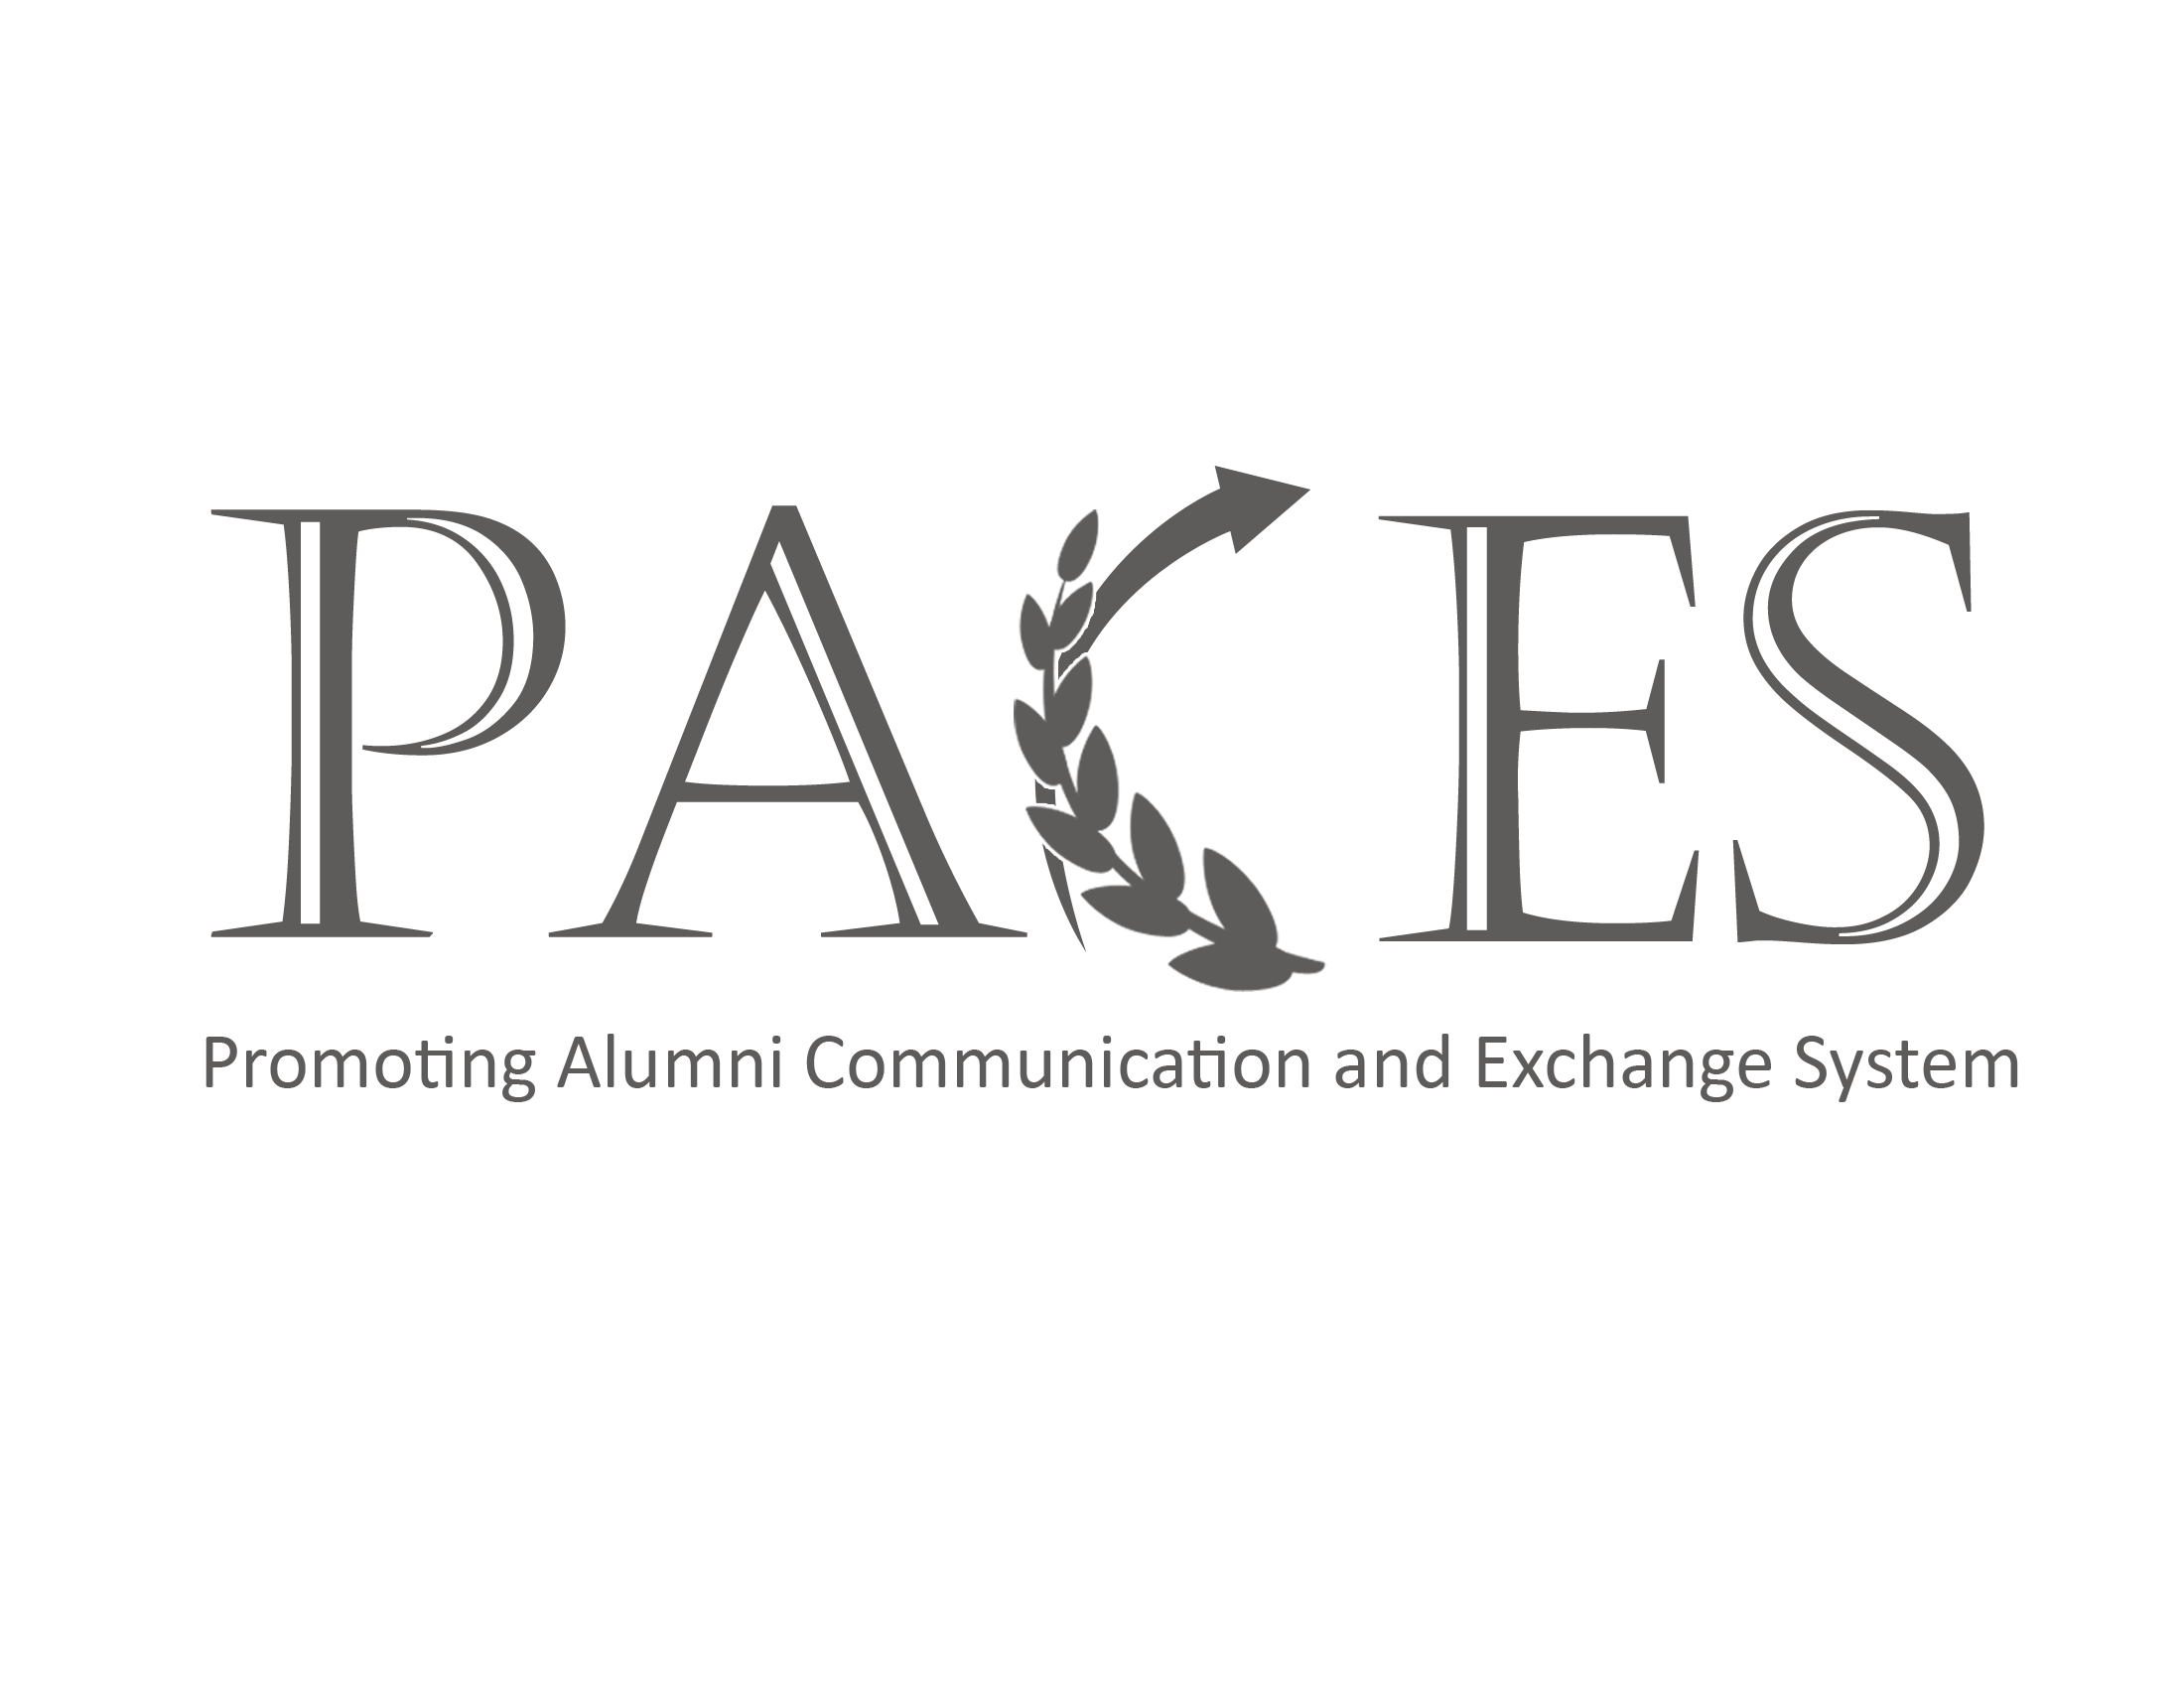 Project PACES